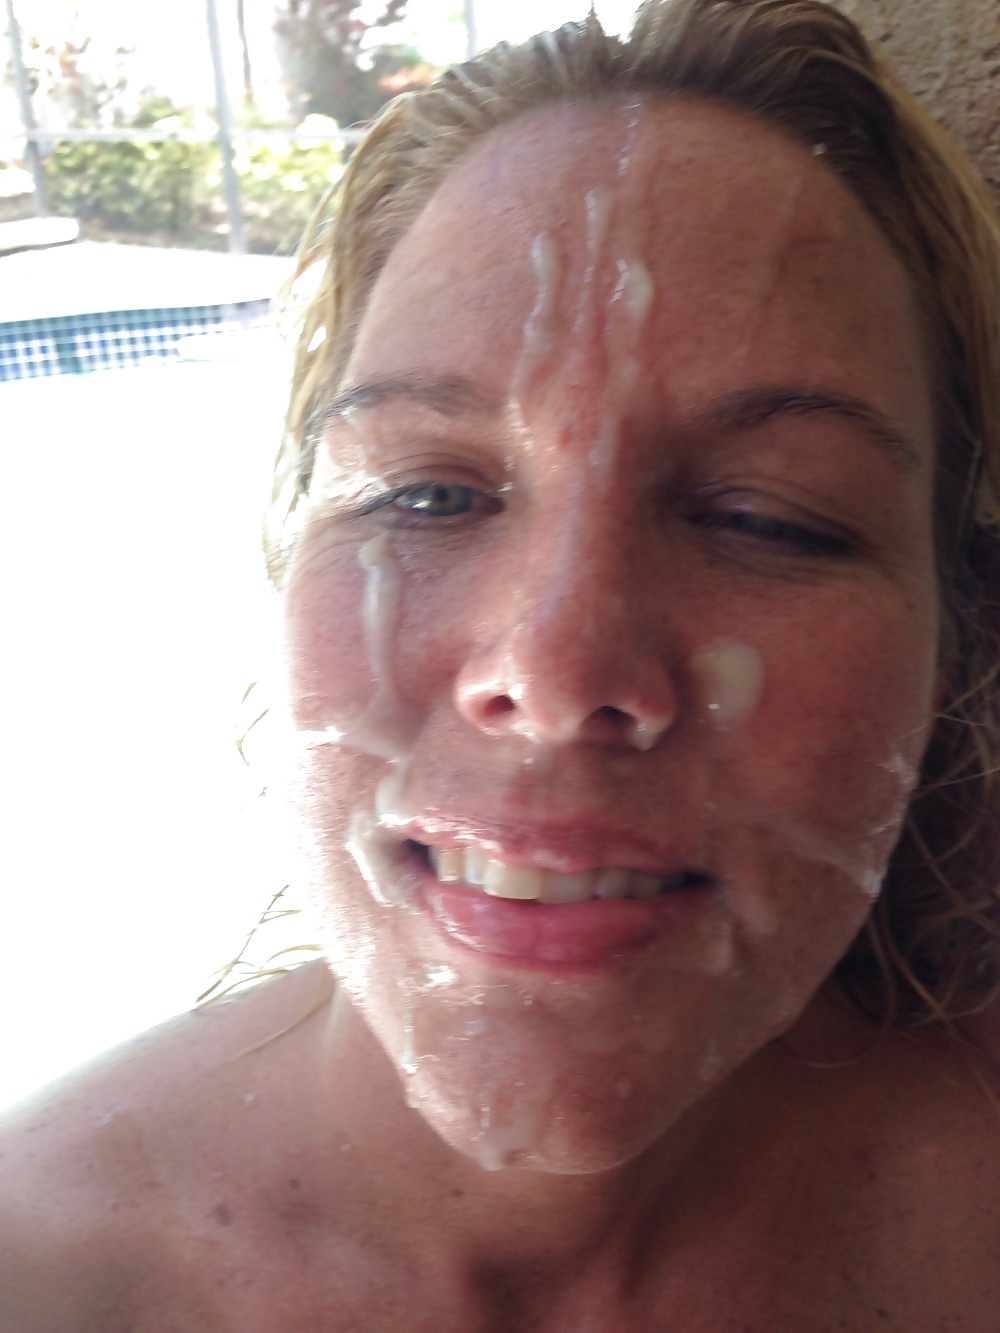 She feels sexy with cum on her face